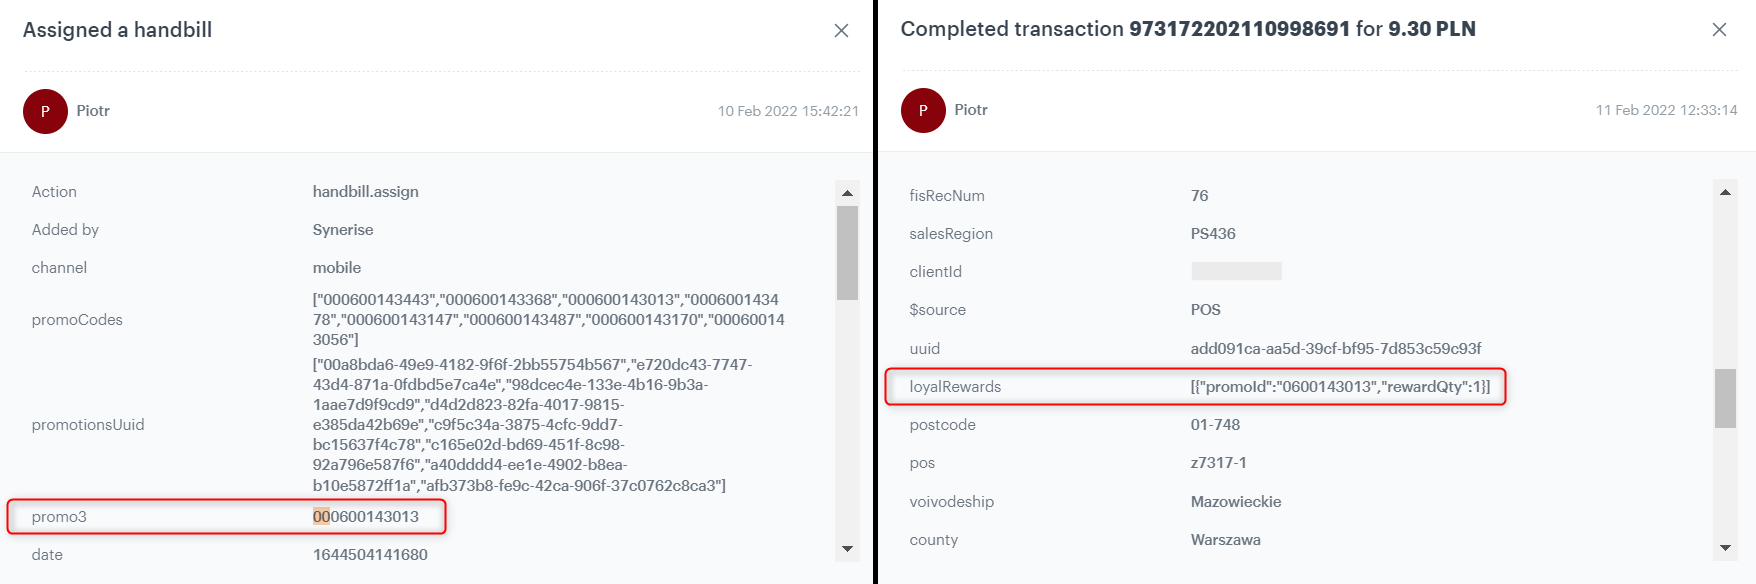 Comparison of the handbil.assign and transaction event